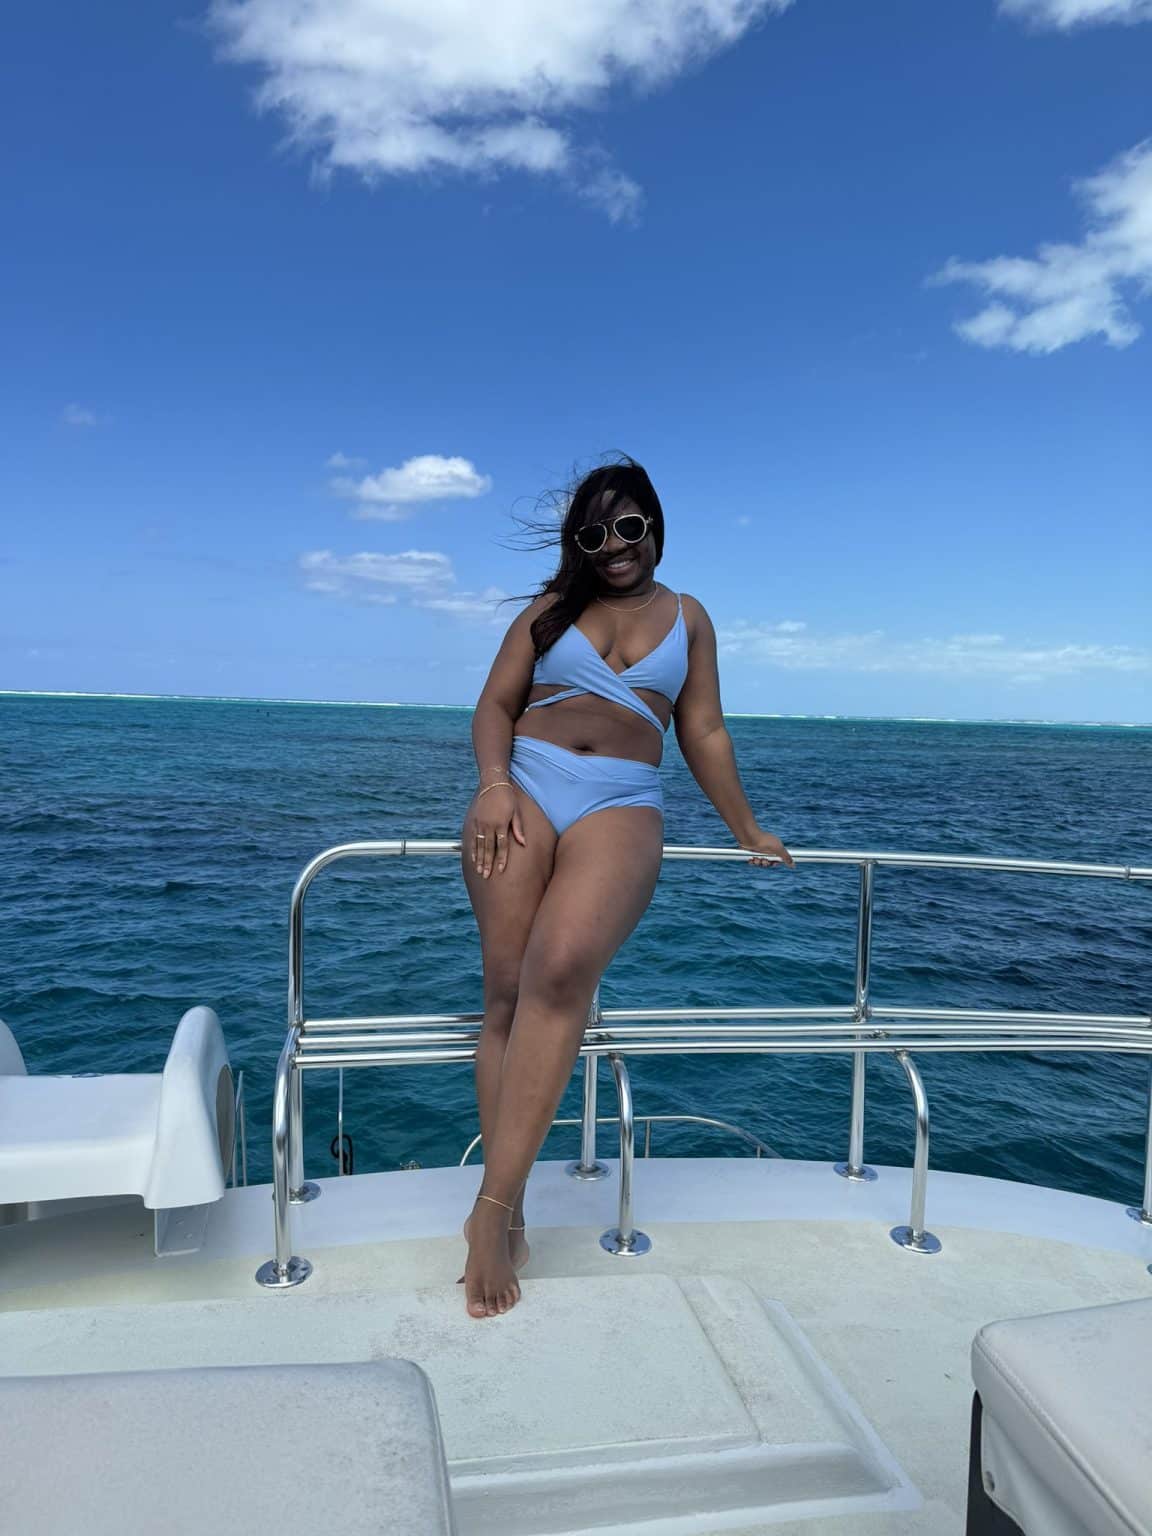 Controversy As Ooni Of Ife’s Daughter Shares Her Bikini Pictures Online